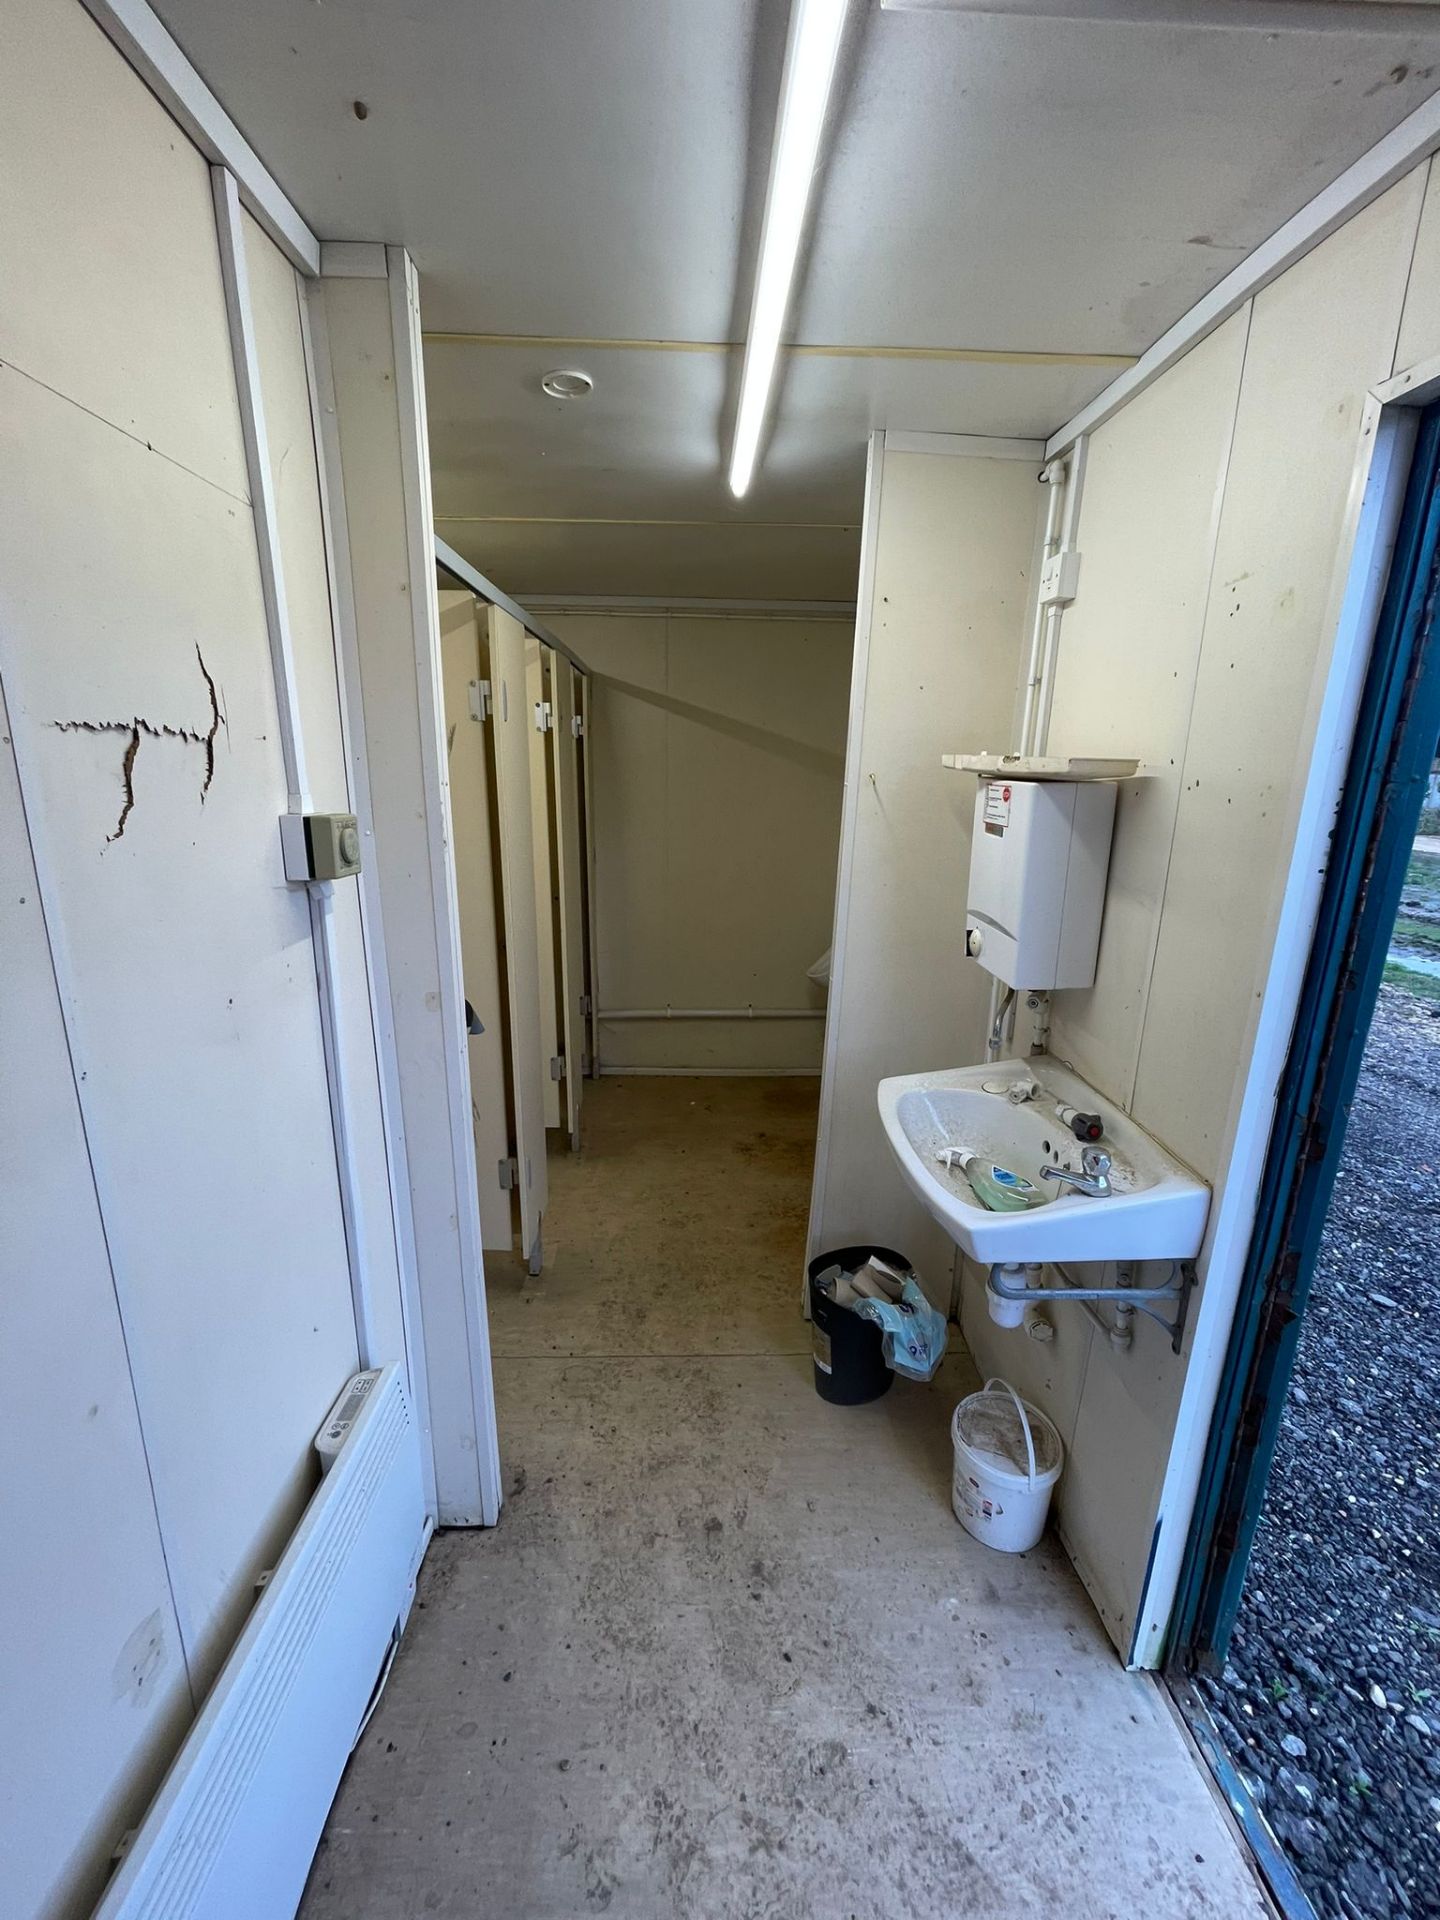 16X10FT TOILET BLOCK - 1X DISABLED/WOMEN’S TOILET - 3X MALES TOILET AND 3X URINALS - Image 7 of 8